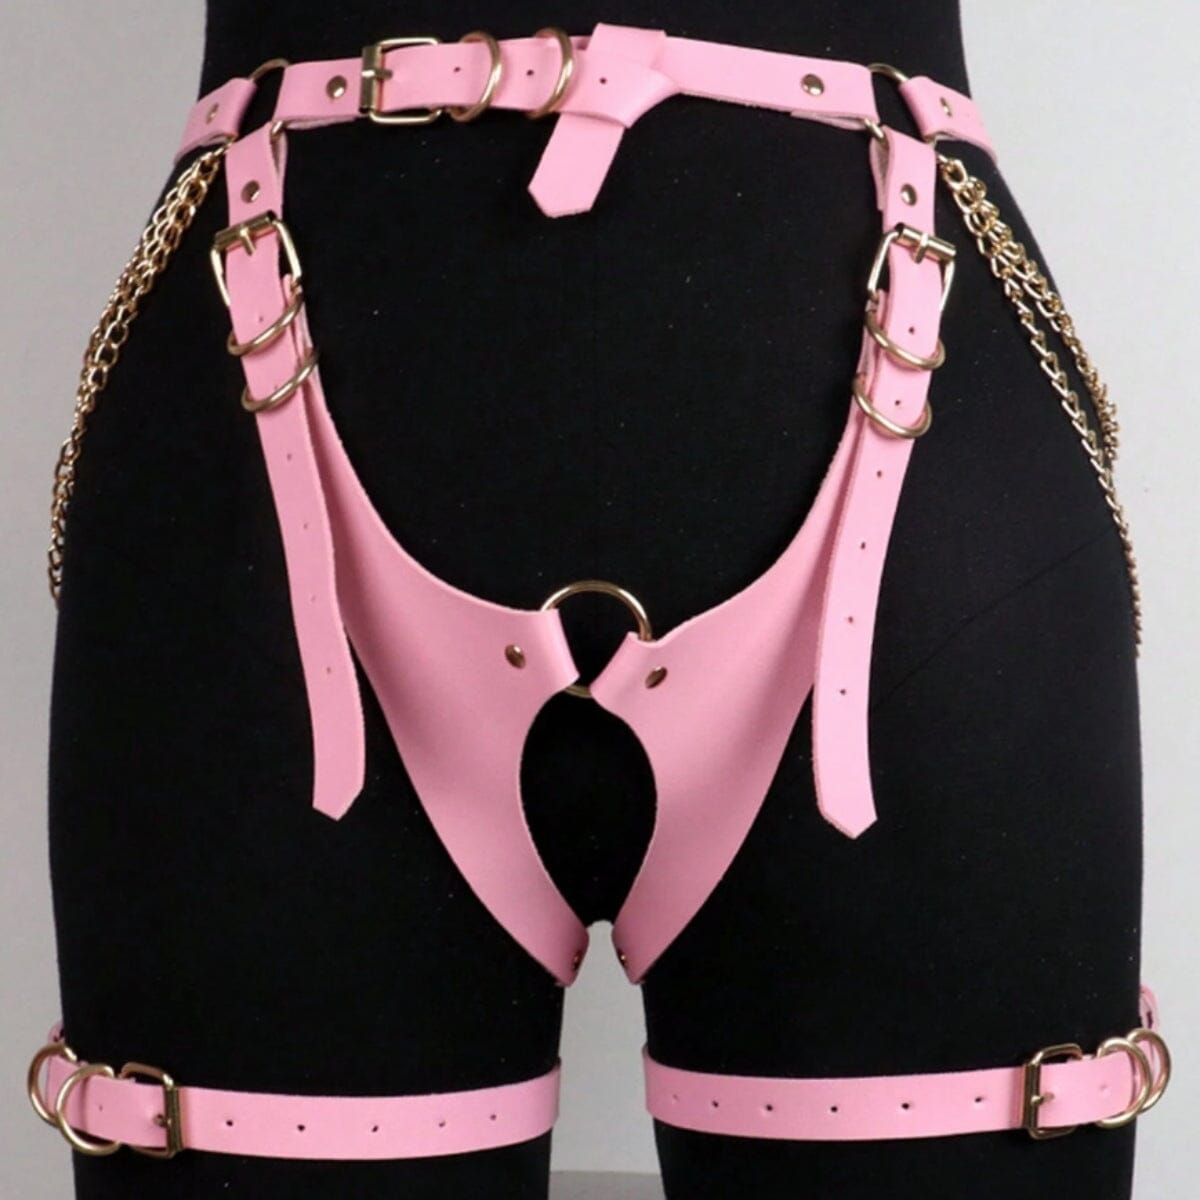 Quincy PU leather buckle garter panty Intimates LOVEFREYA Free size Pink PU leather